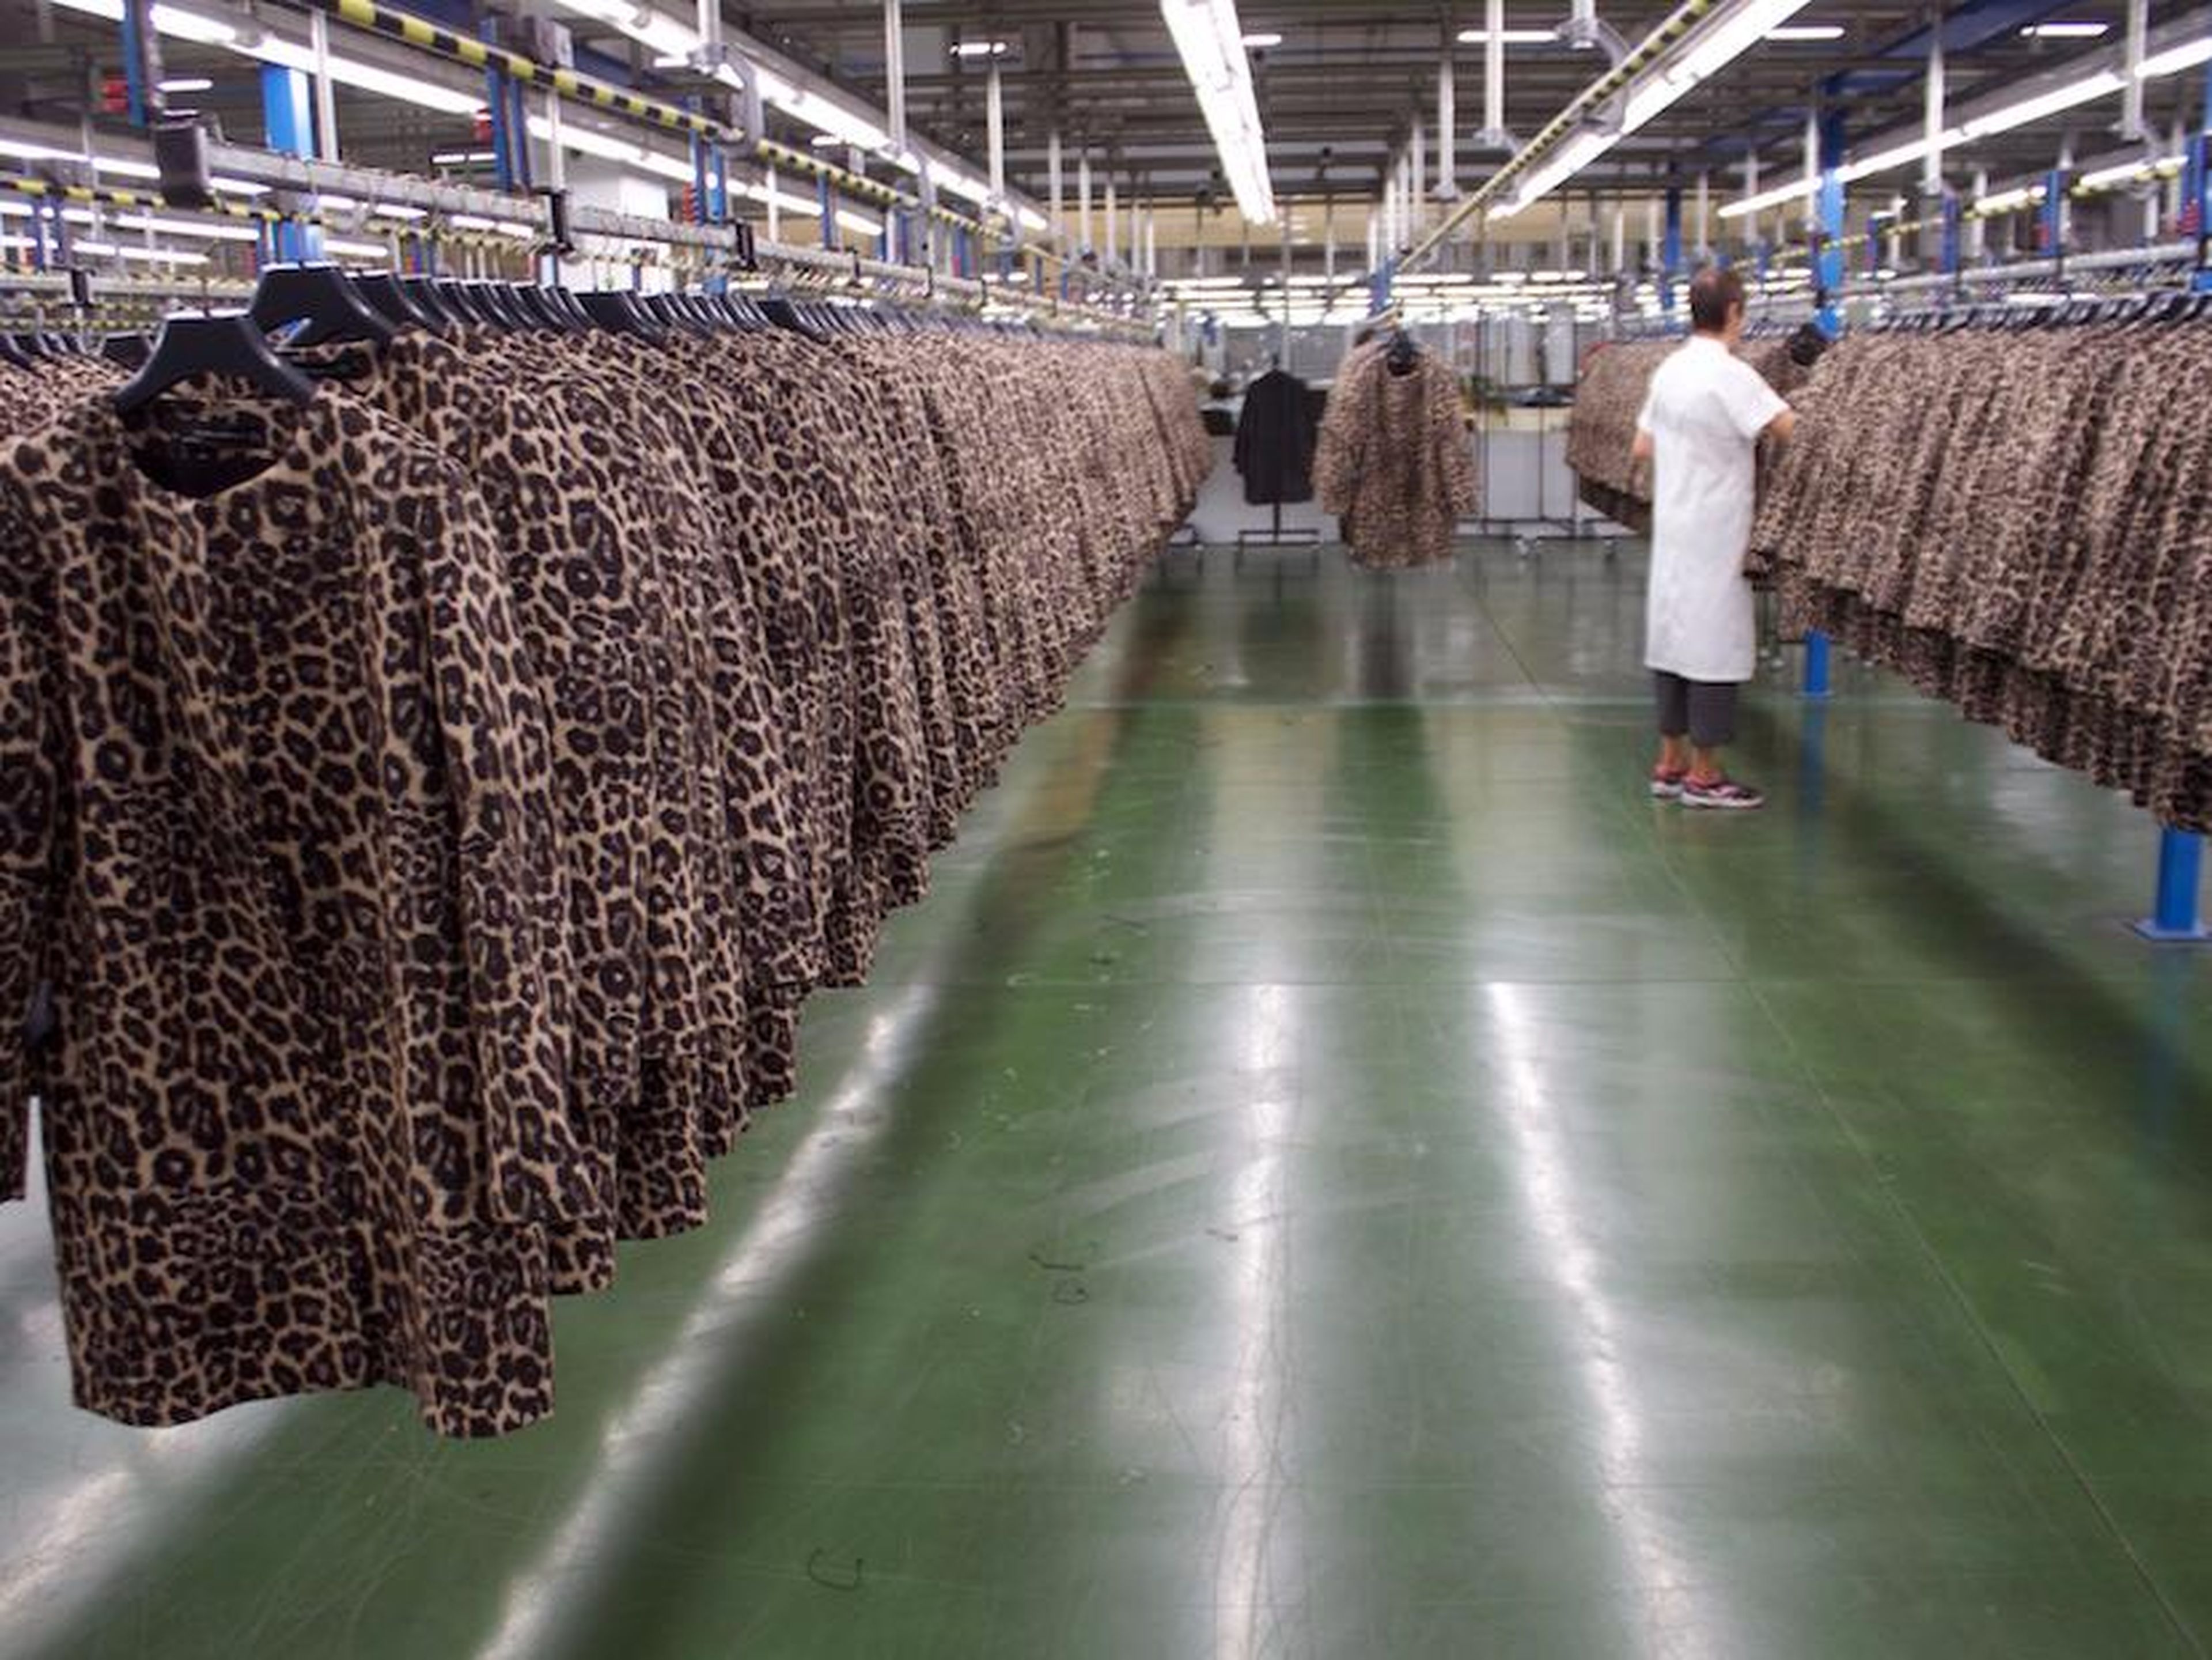 Rows of Zara coats are checked by hand.